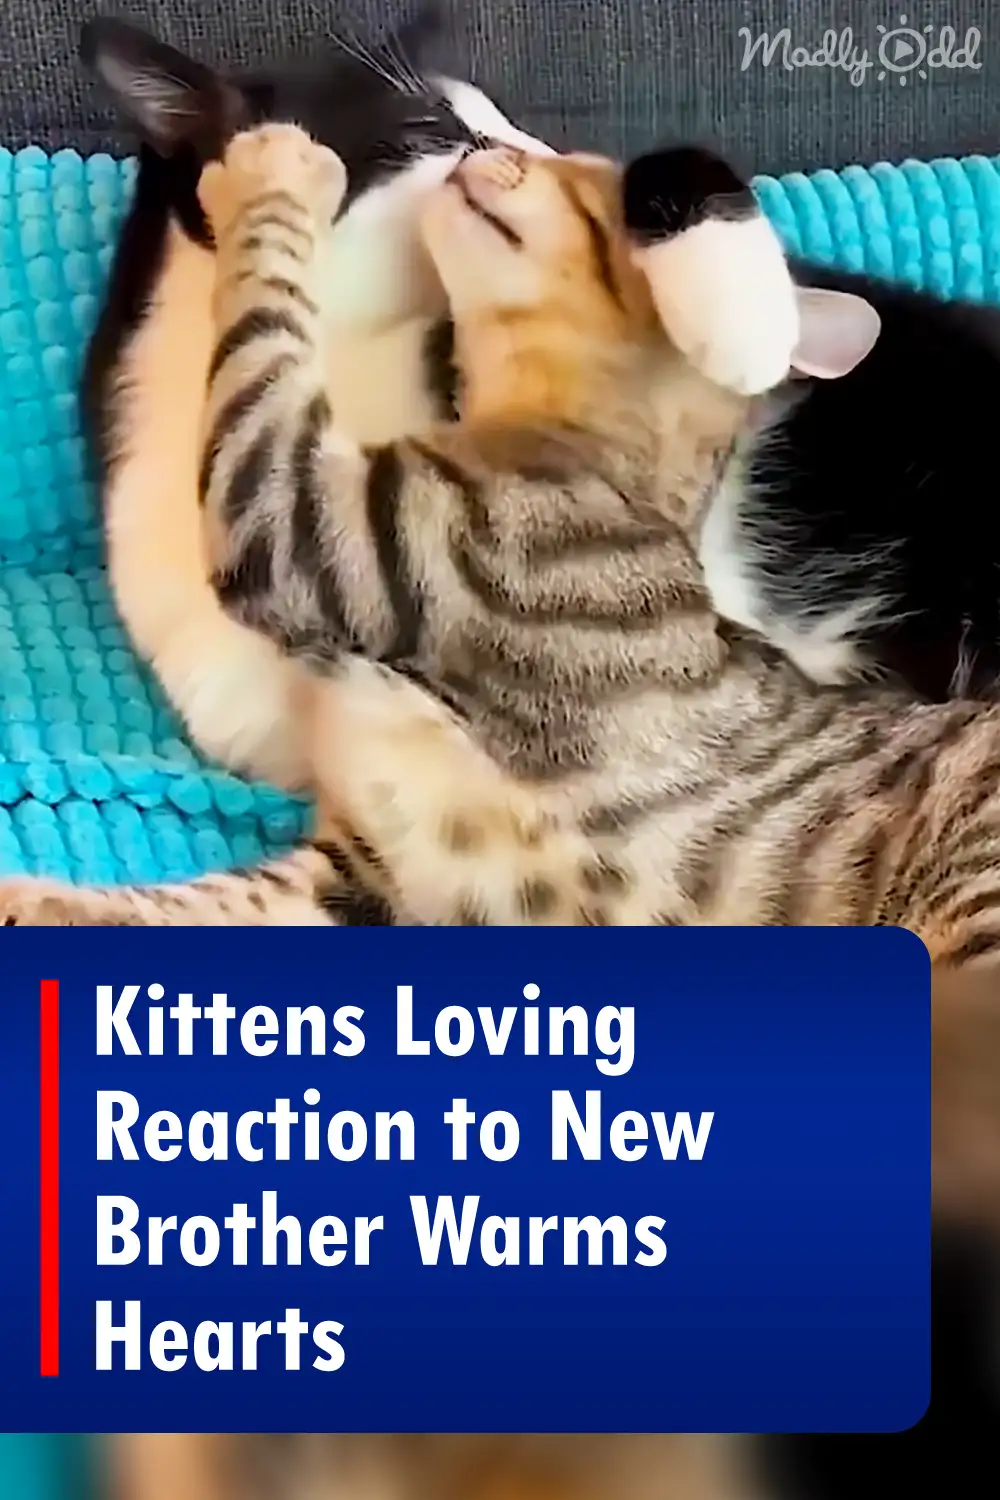 Kittens Loving Reaction to New Brother Warms Hearts